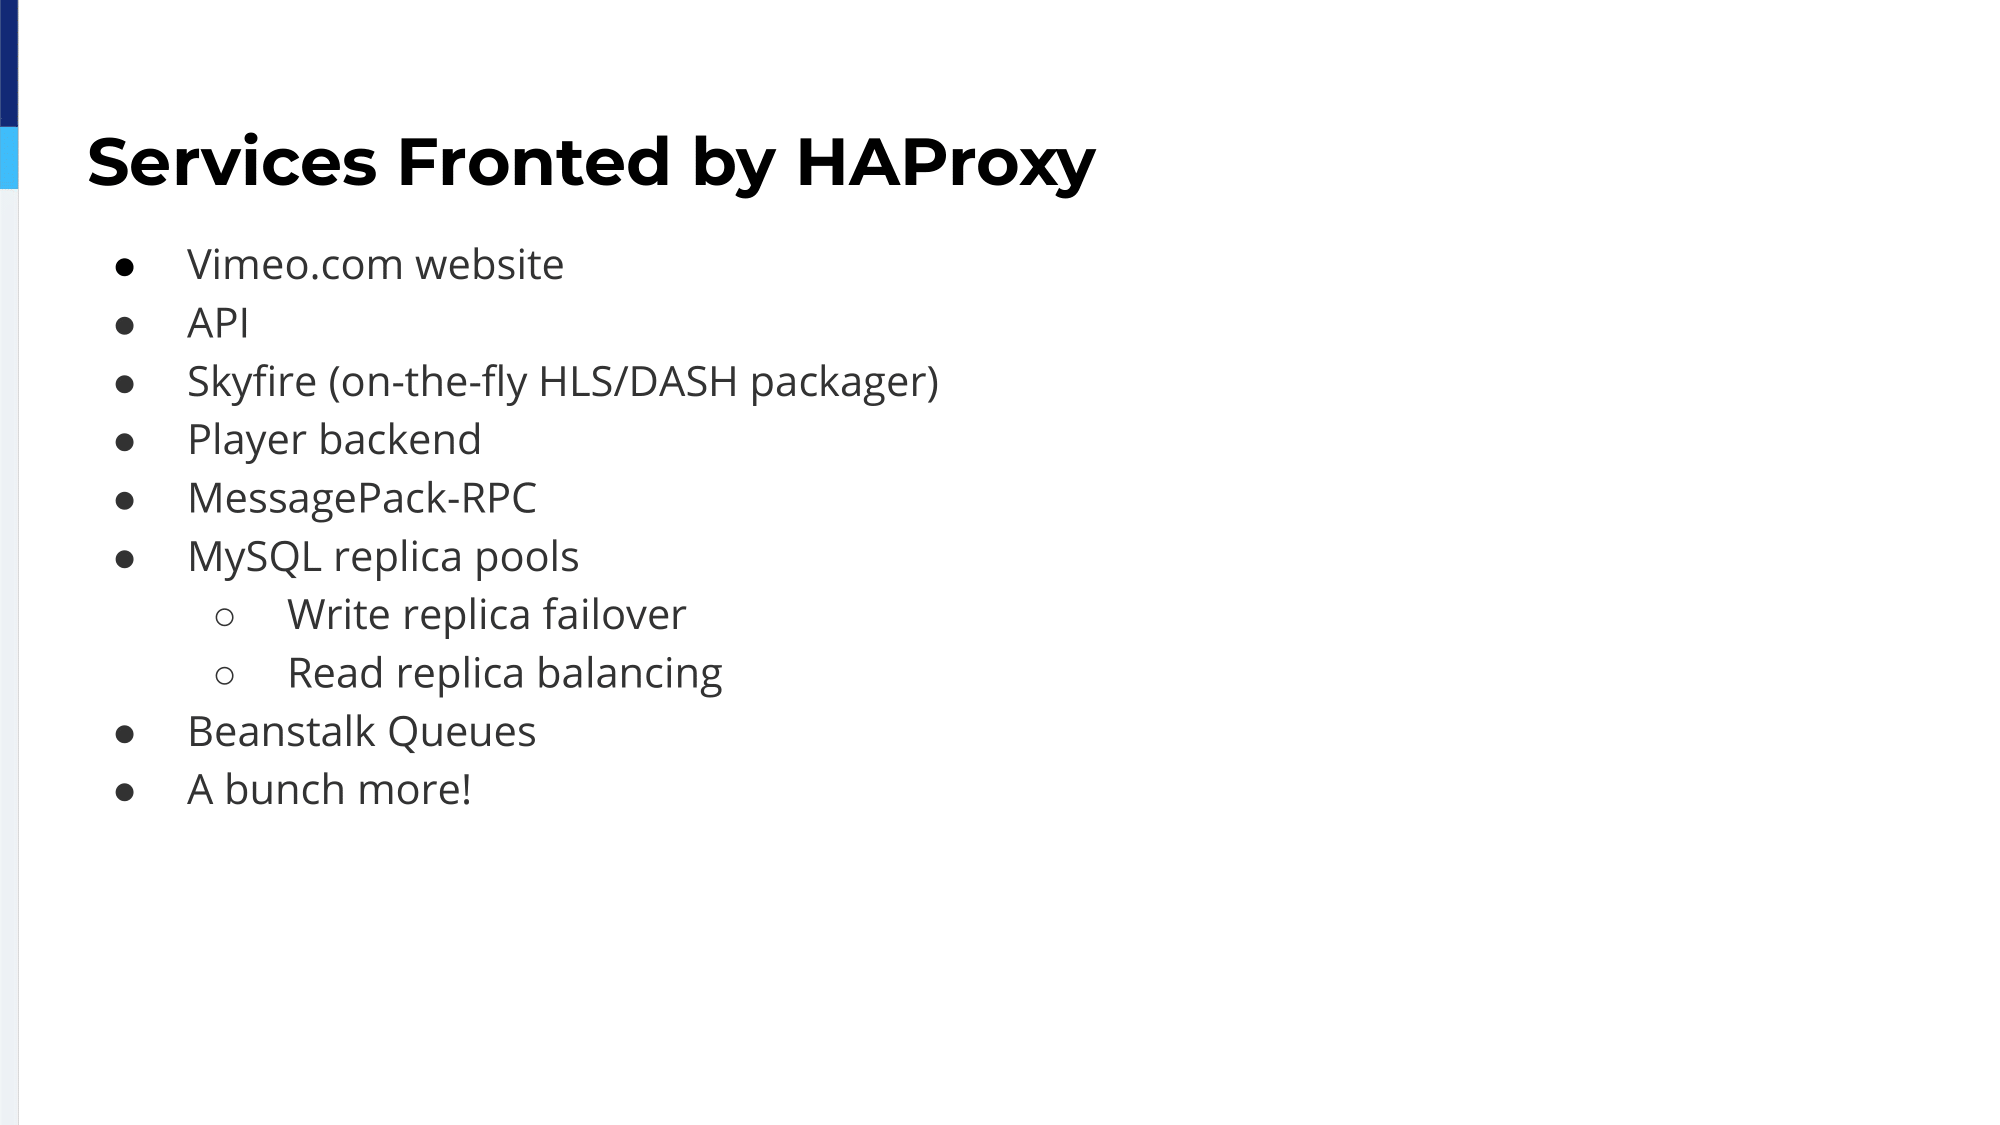 2.-services-fronted-by-haproxy